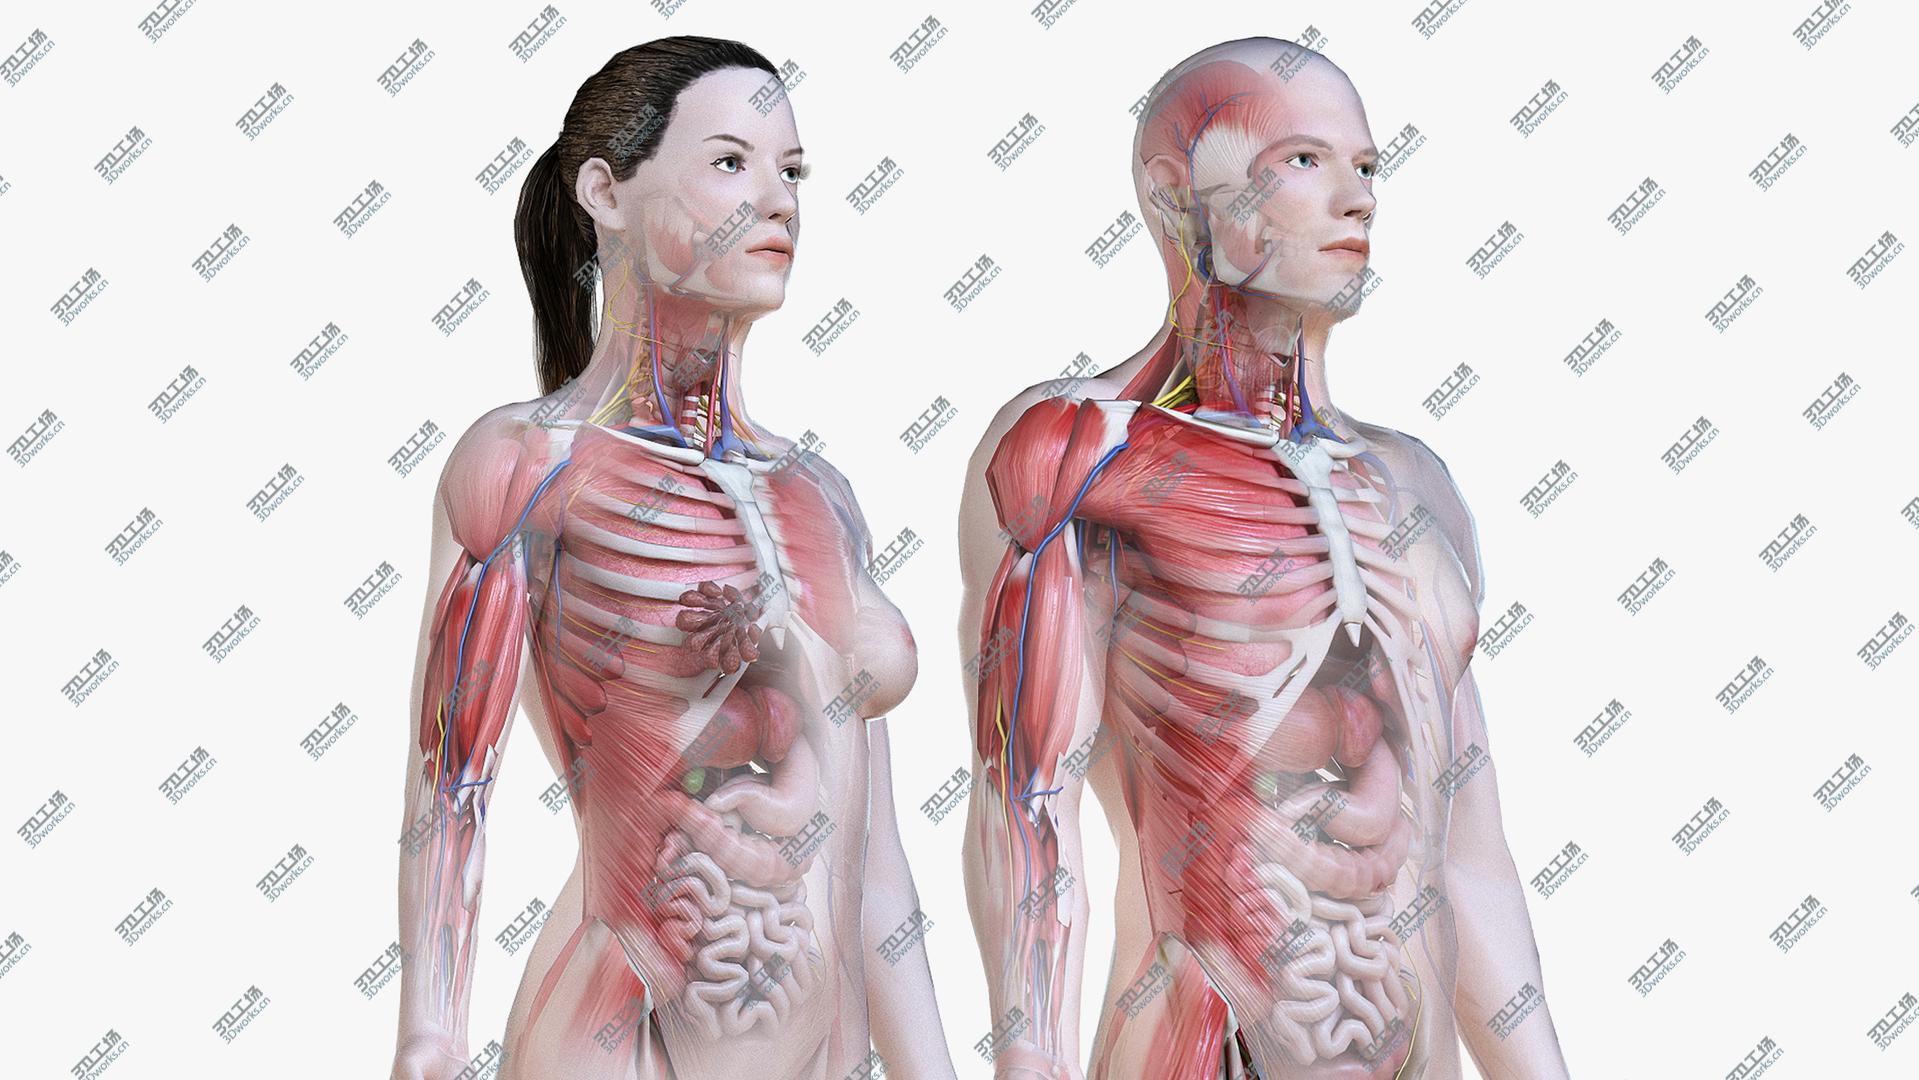 images/goods_img/20210113/3D Full Male And Female Anatomy Low Poly Set/2.jpg